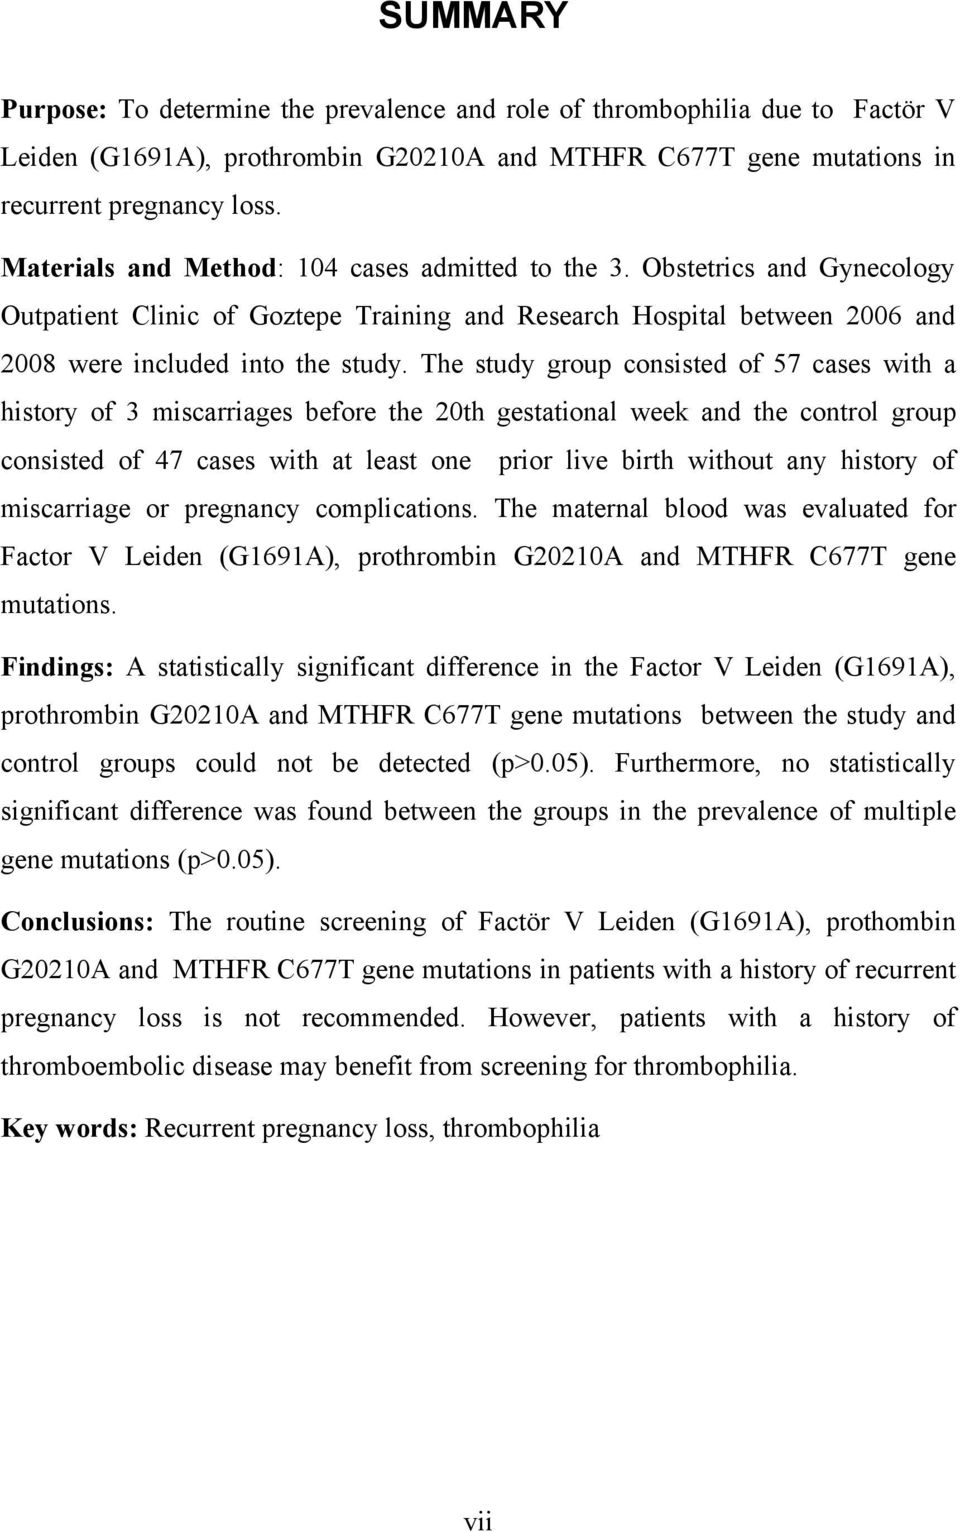 The study group consisted of 57 cases with a history of 3 miscarriages before the 20th gestational week and the control group consisted of 47 cases with at least one prior live birth without any